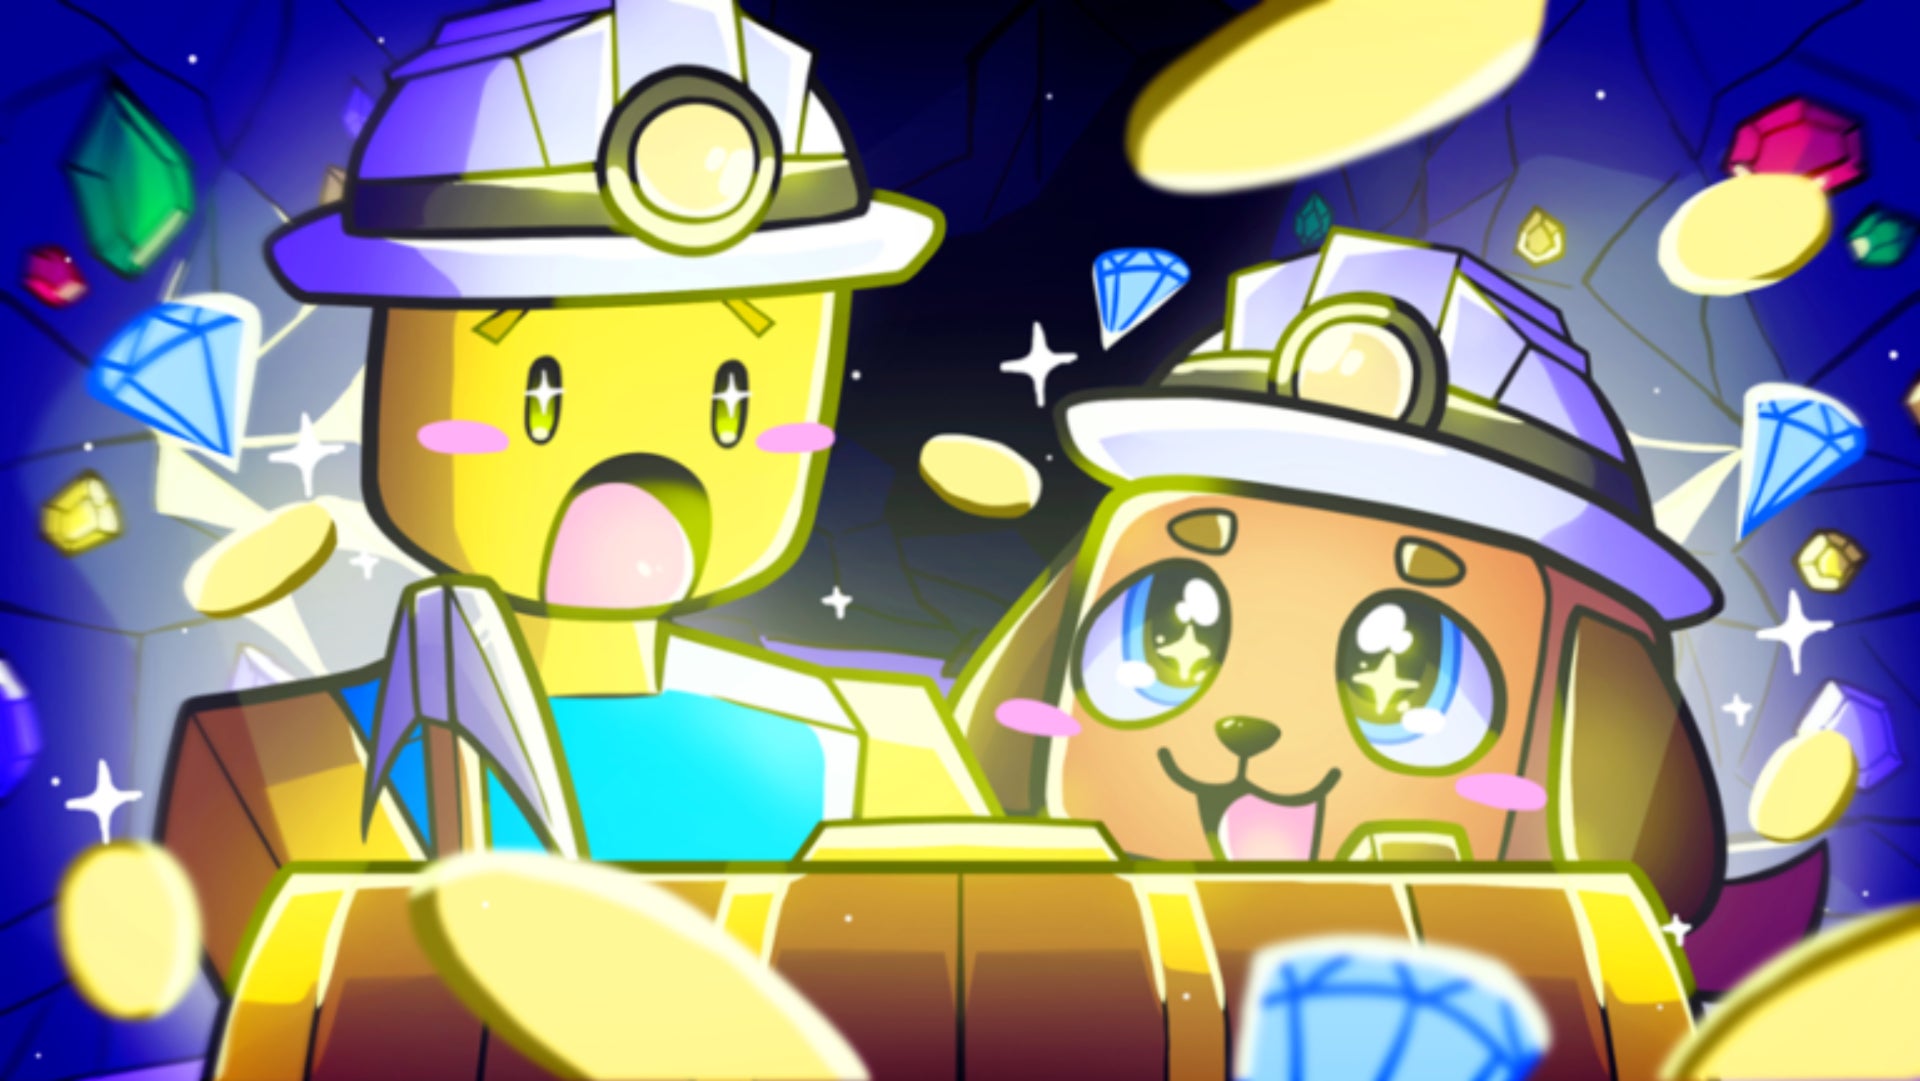 Mining Simulator 2 Original Roblox Art, a character dressed as a Miner is looking at a treasure chest next to their pet dog who is wearing a helmet